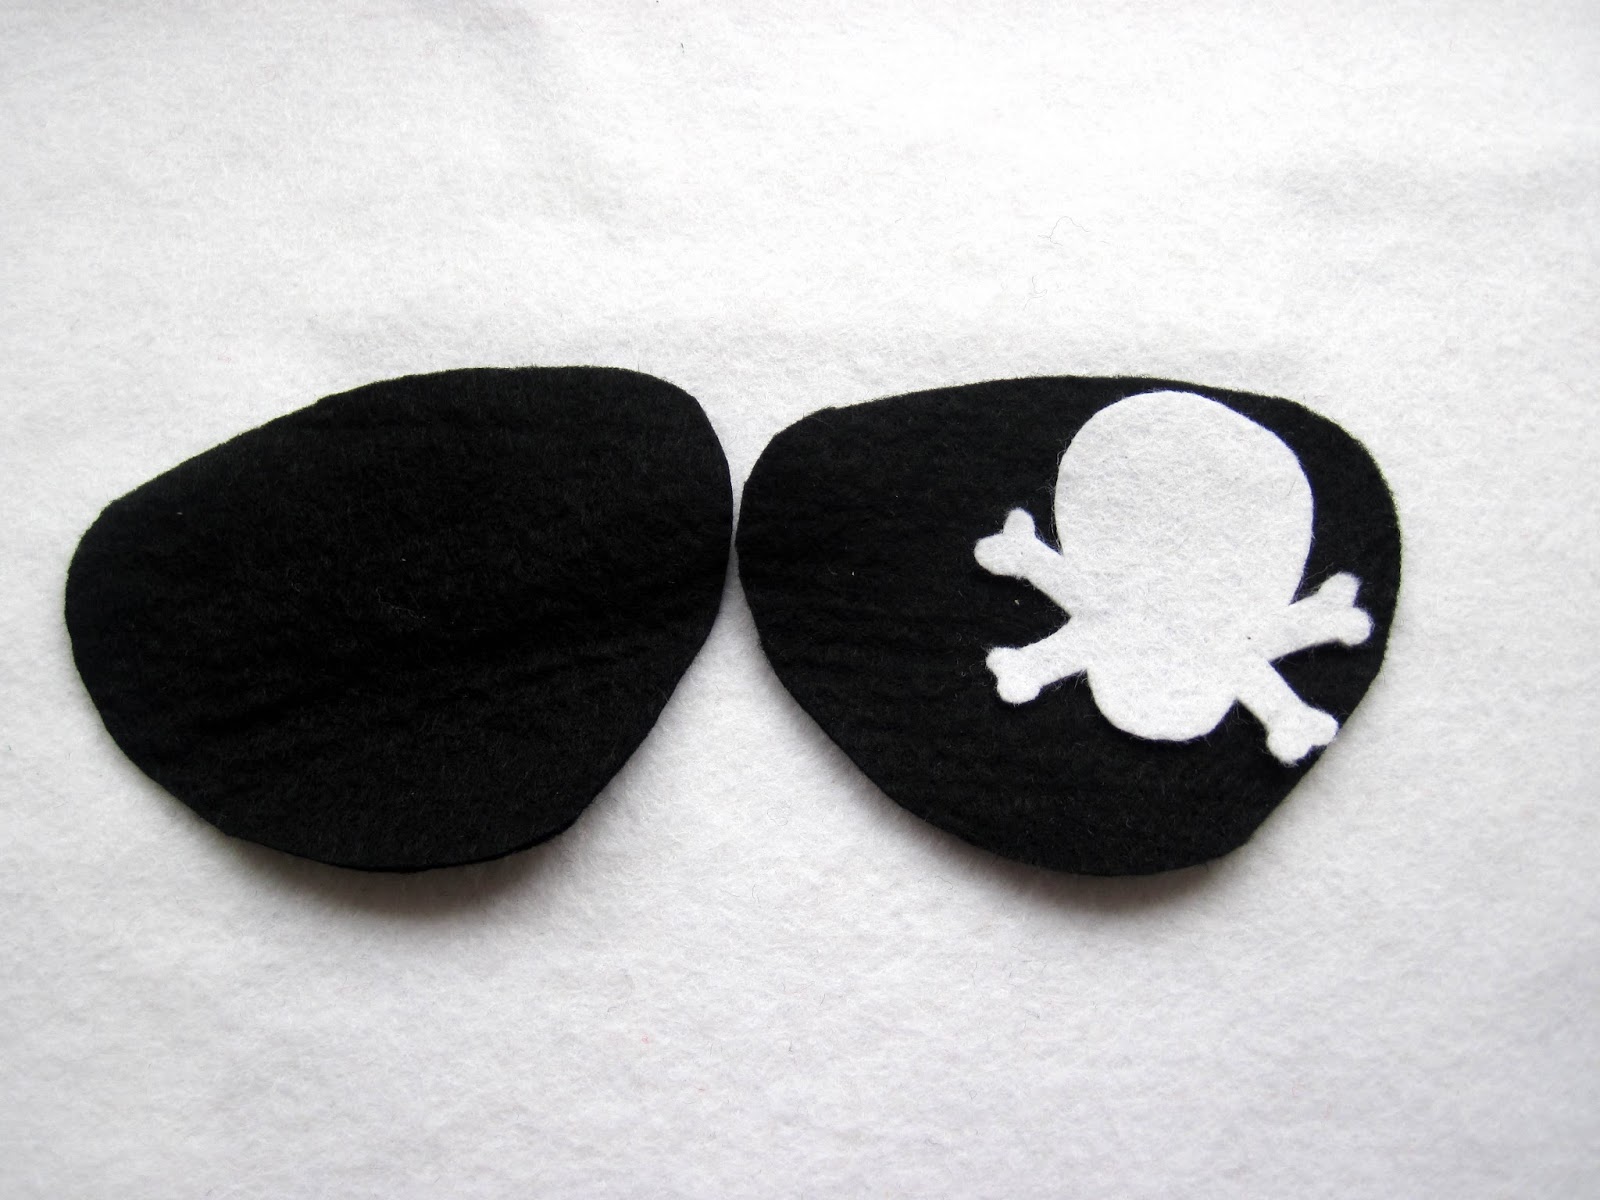 How To Make A Pirate Eye Patch